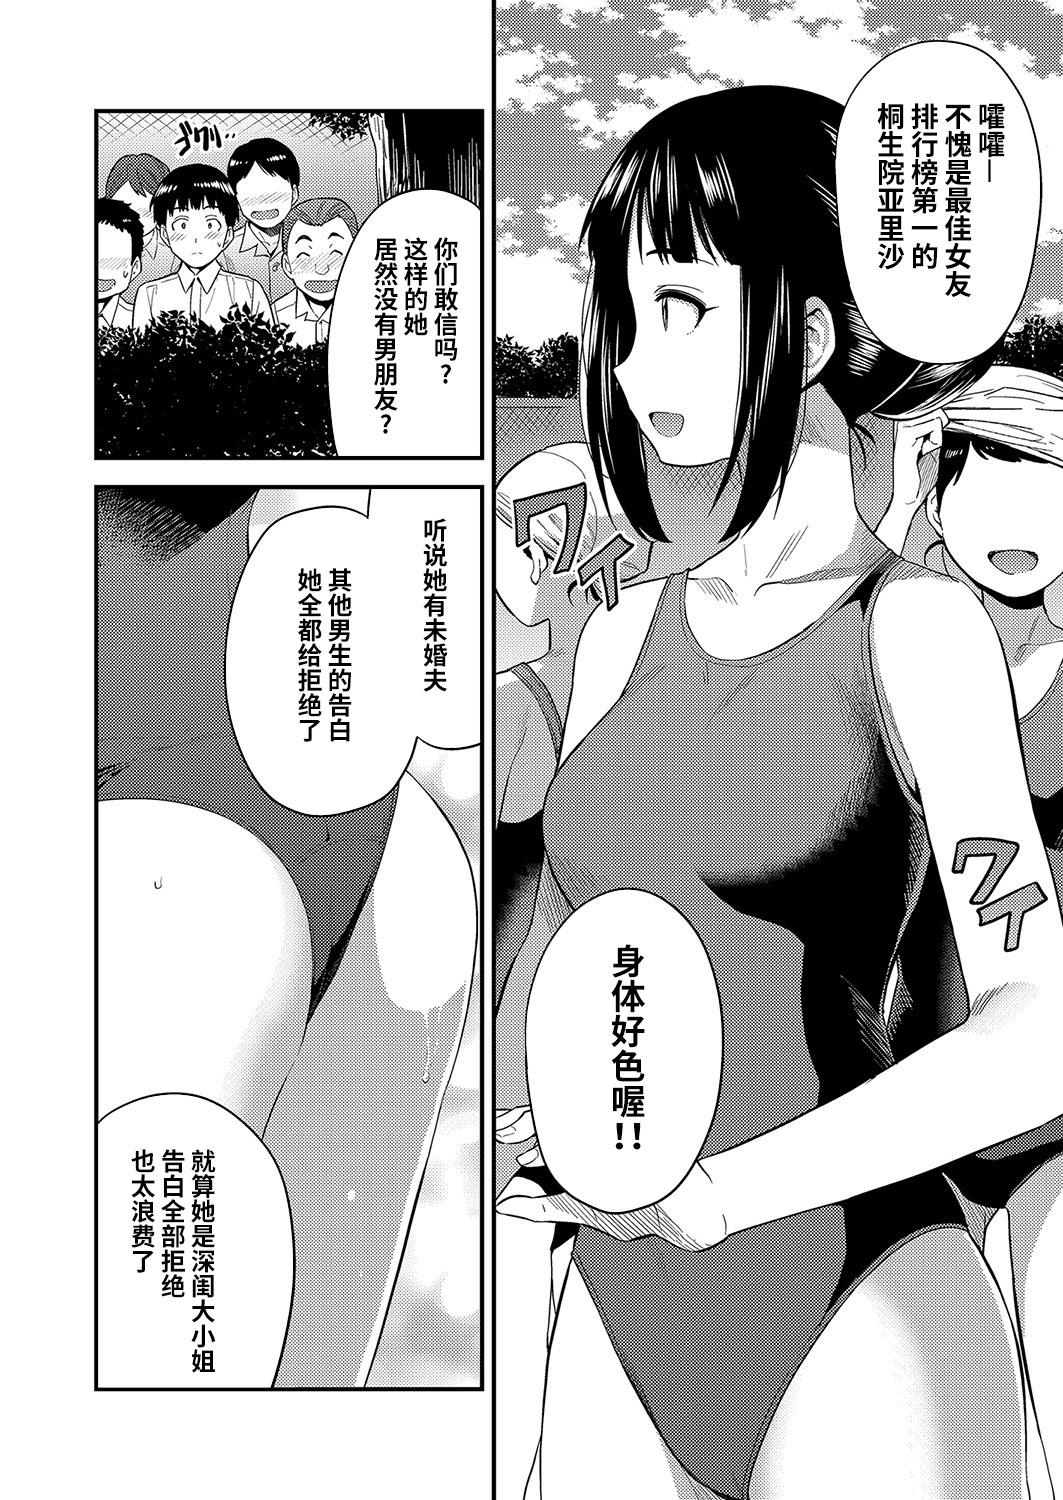 Peluda 結婚するまで交尾禁止 Gay Military - Page 4